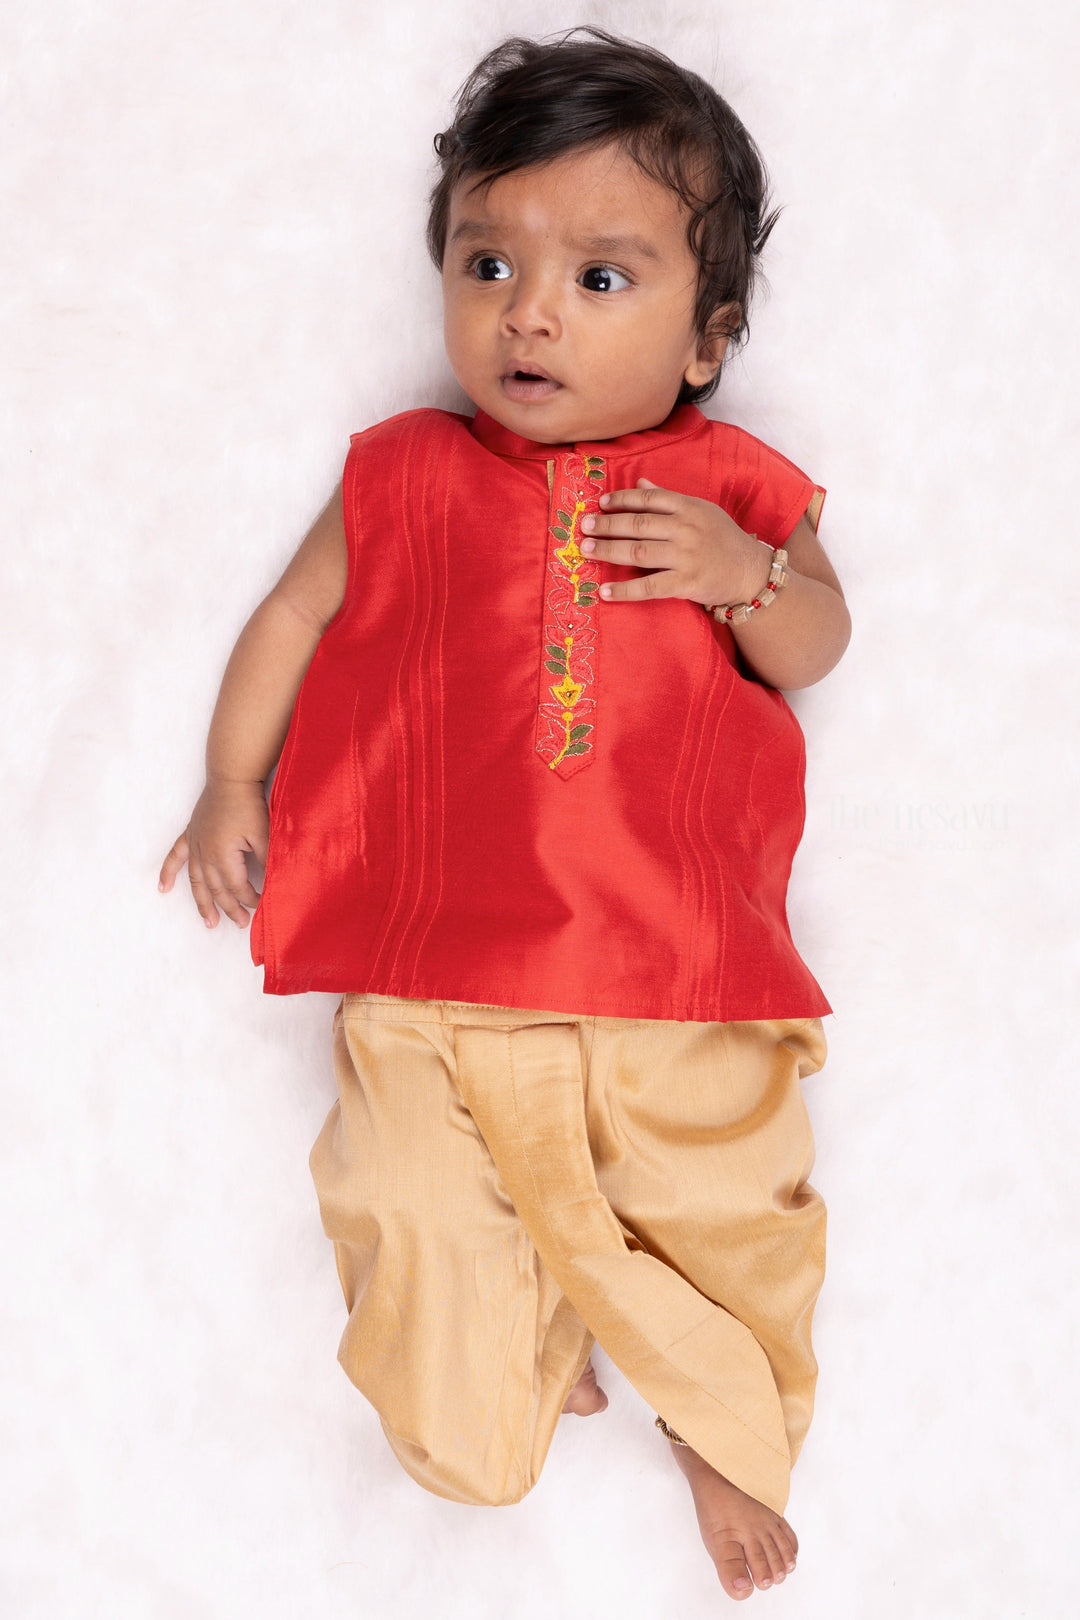 The Nesavu Boys Dothi Set Red Radiance: Exquisite Floral Embroidered Shirt & Beige Panchagajam Combo for Boys Nesavu 12 (3M) / Red / Dupioni Silk BES397B-12 Boys Indian Traditional Dress | Ethnic Shirt with panchagajam Set | The Nesavu